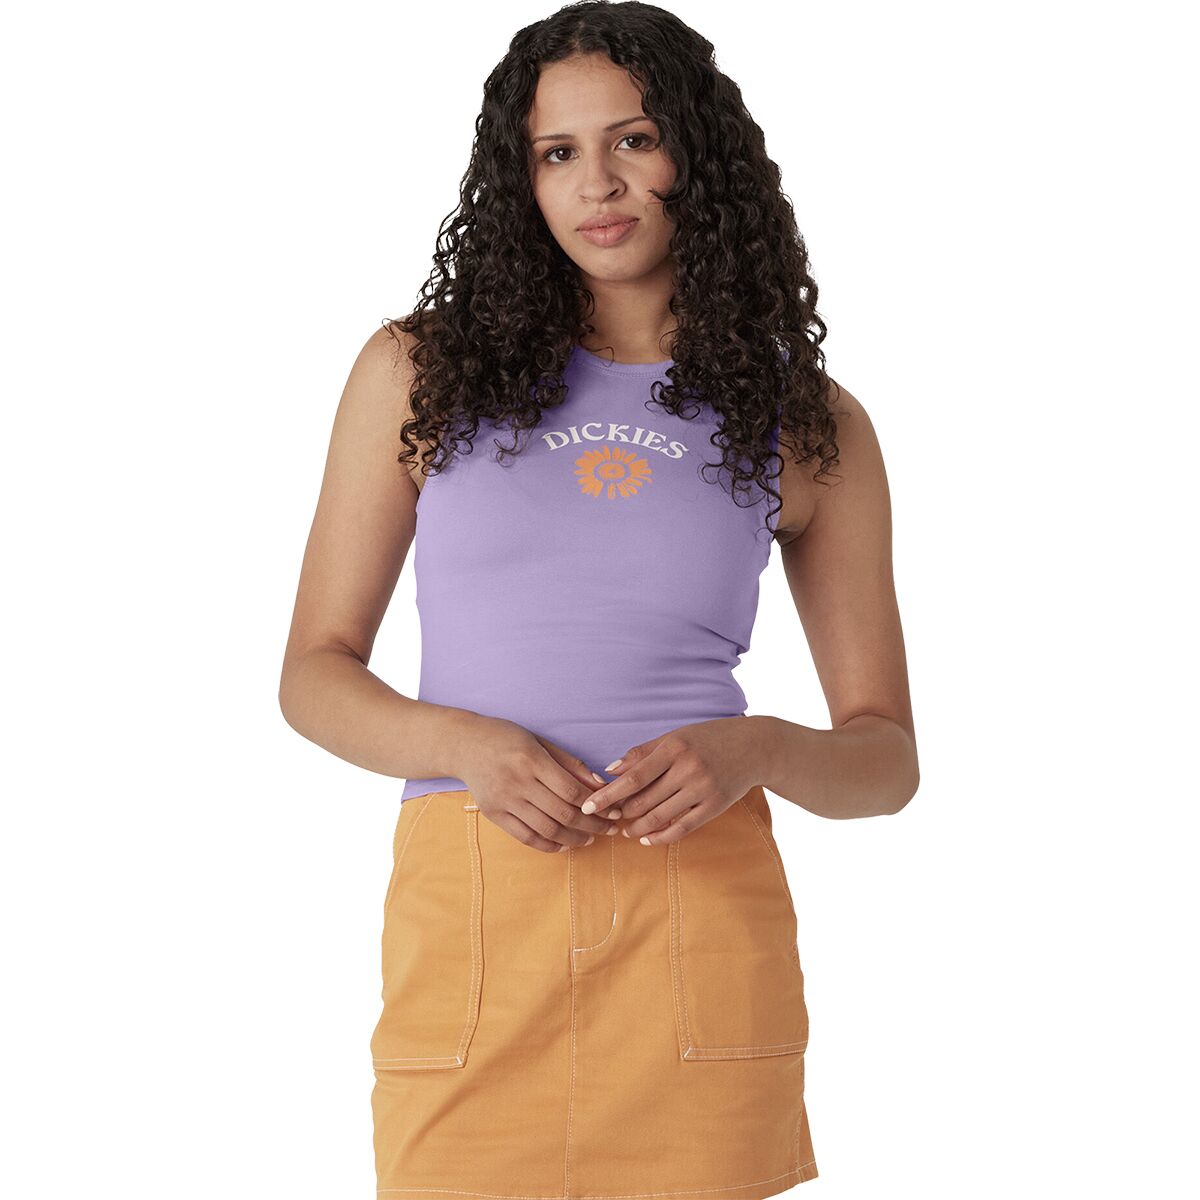 Dickies Fitted Racer Back Graphic Tank Top - Women's